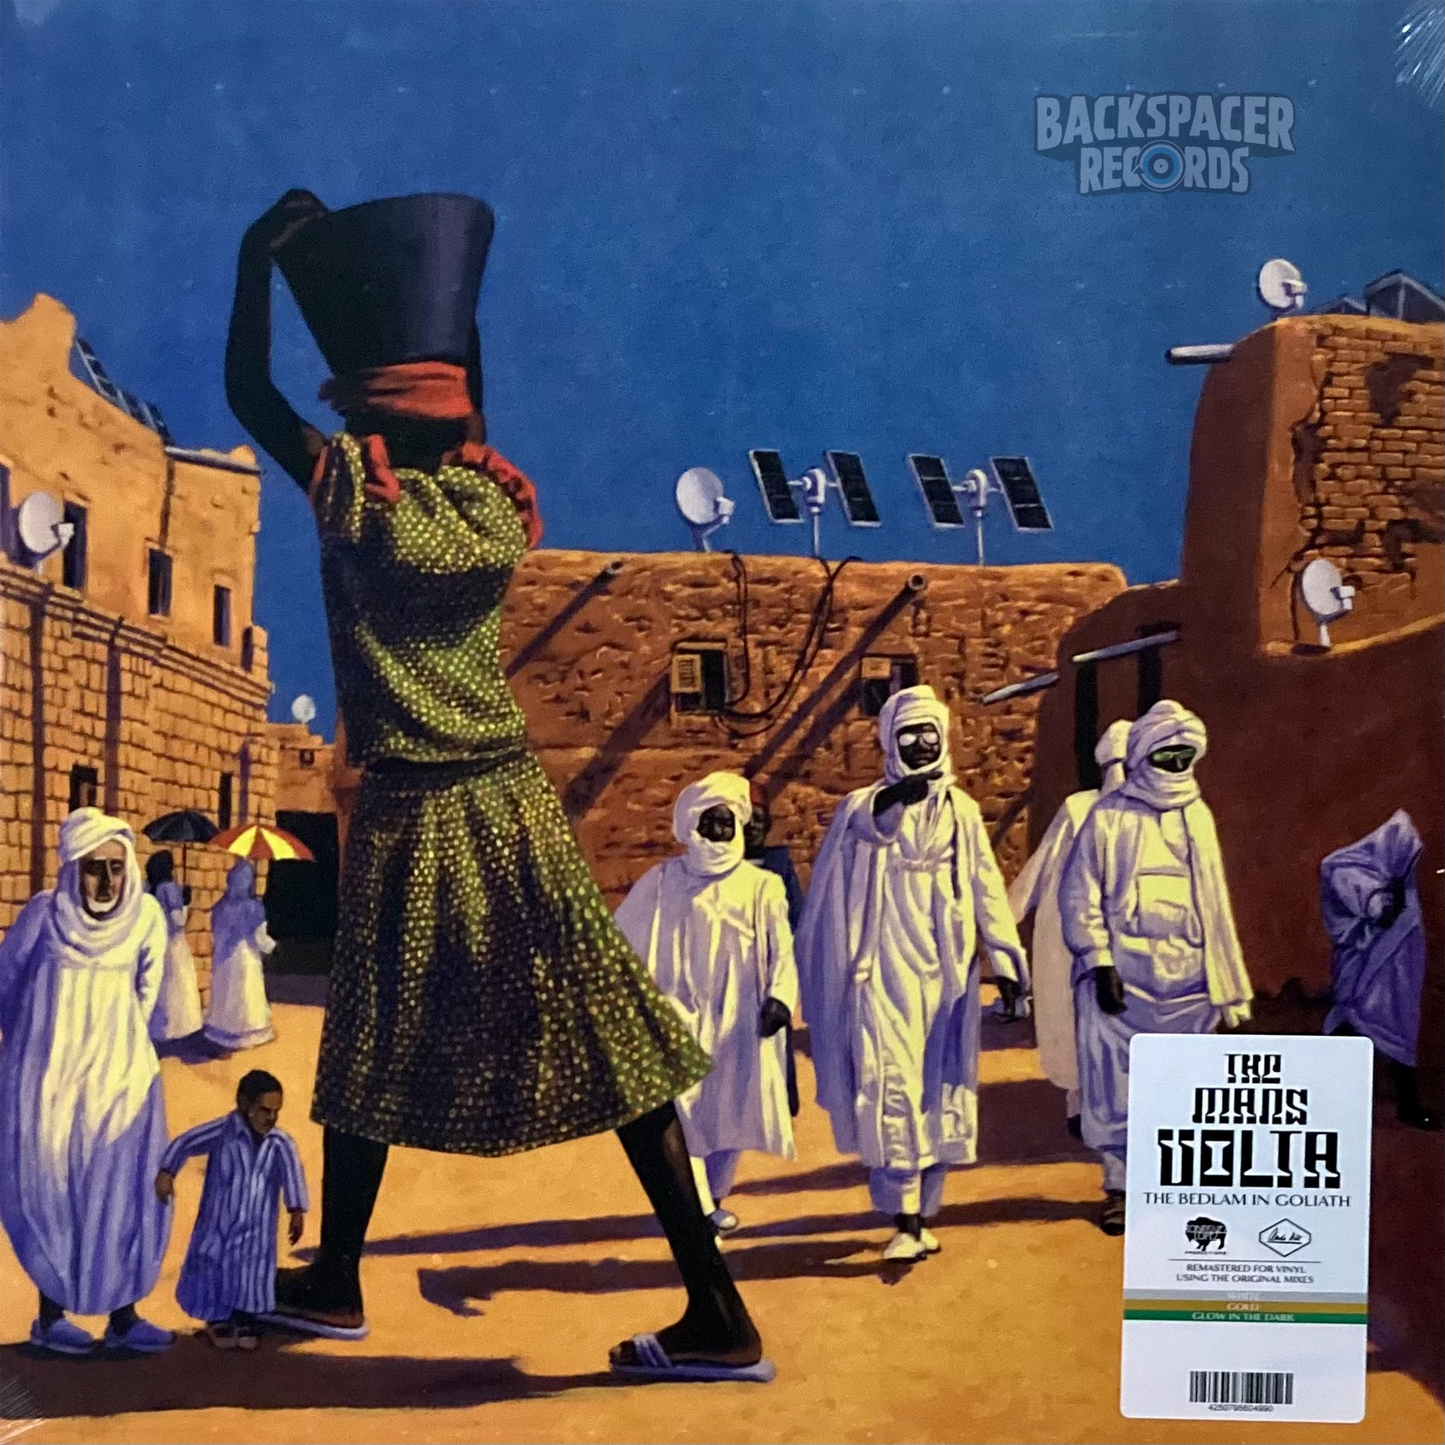 The Mars Volta - The Bedlam In Goliath (Mr.Muggs) (Limited Edition) 3-LP (Sealed)